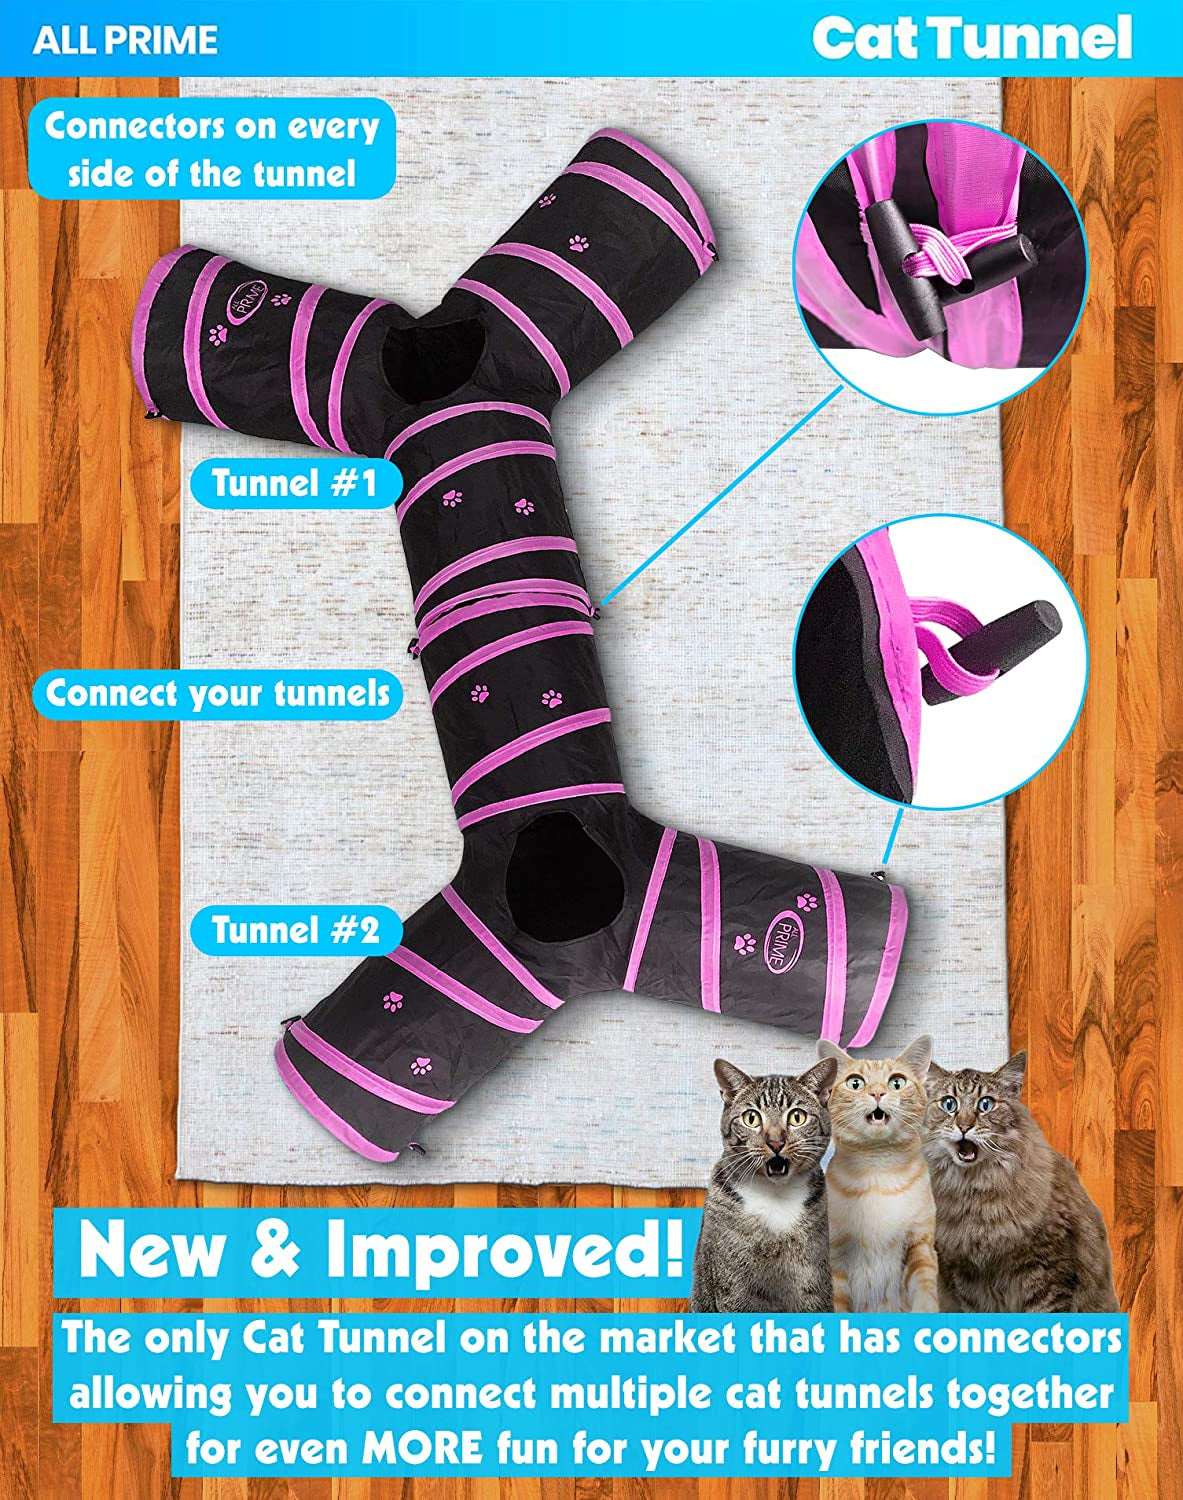 Cat Tunnel - Also Included Is a ($5 Value) Interactive Cat Toy - Toys for Cats - Cat Tunnels for Indoor Cats - Cat Tube - Collapsible 3 Way Pet Tunnel - Great Toy for Cats & Rabb (Pink)